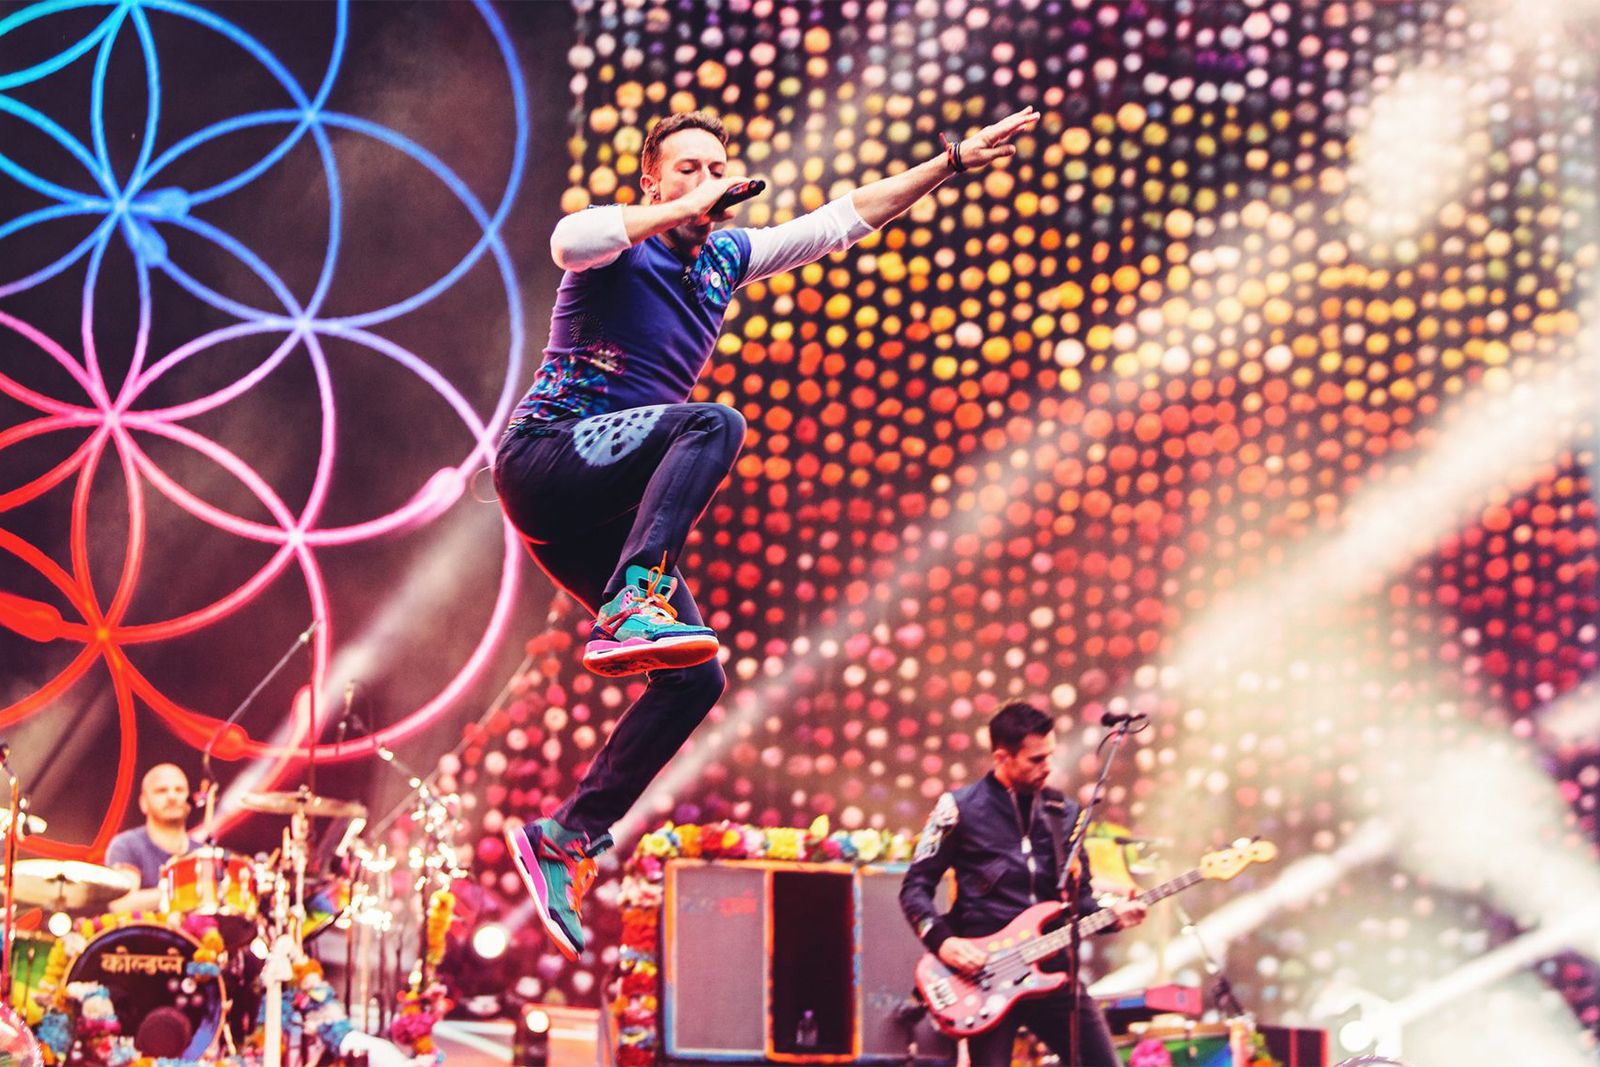 Samsung will be streaming a live Coldplay concert in VR image 1